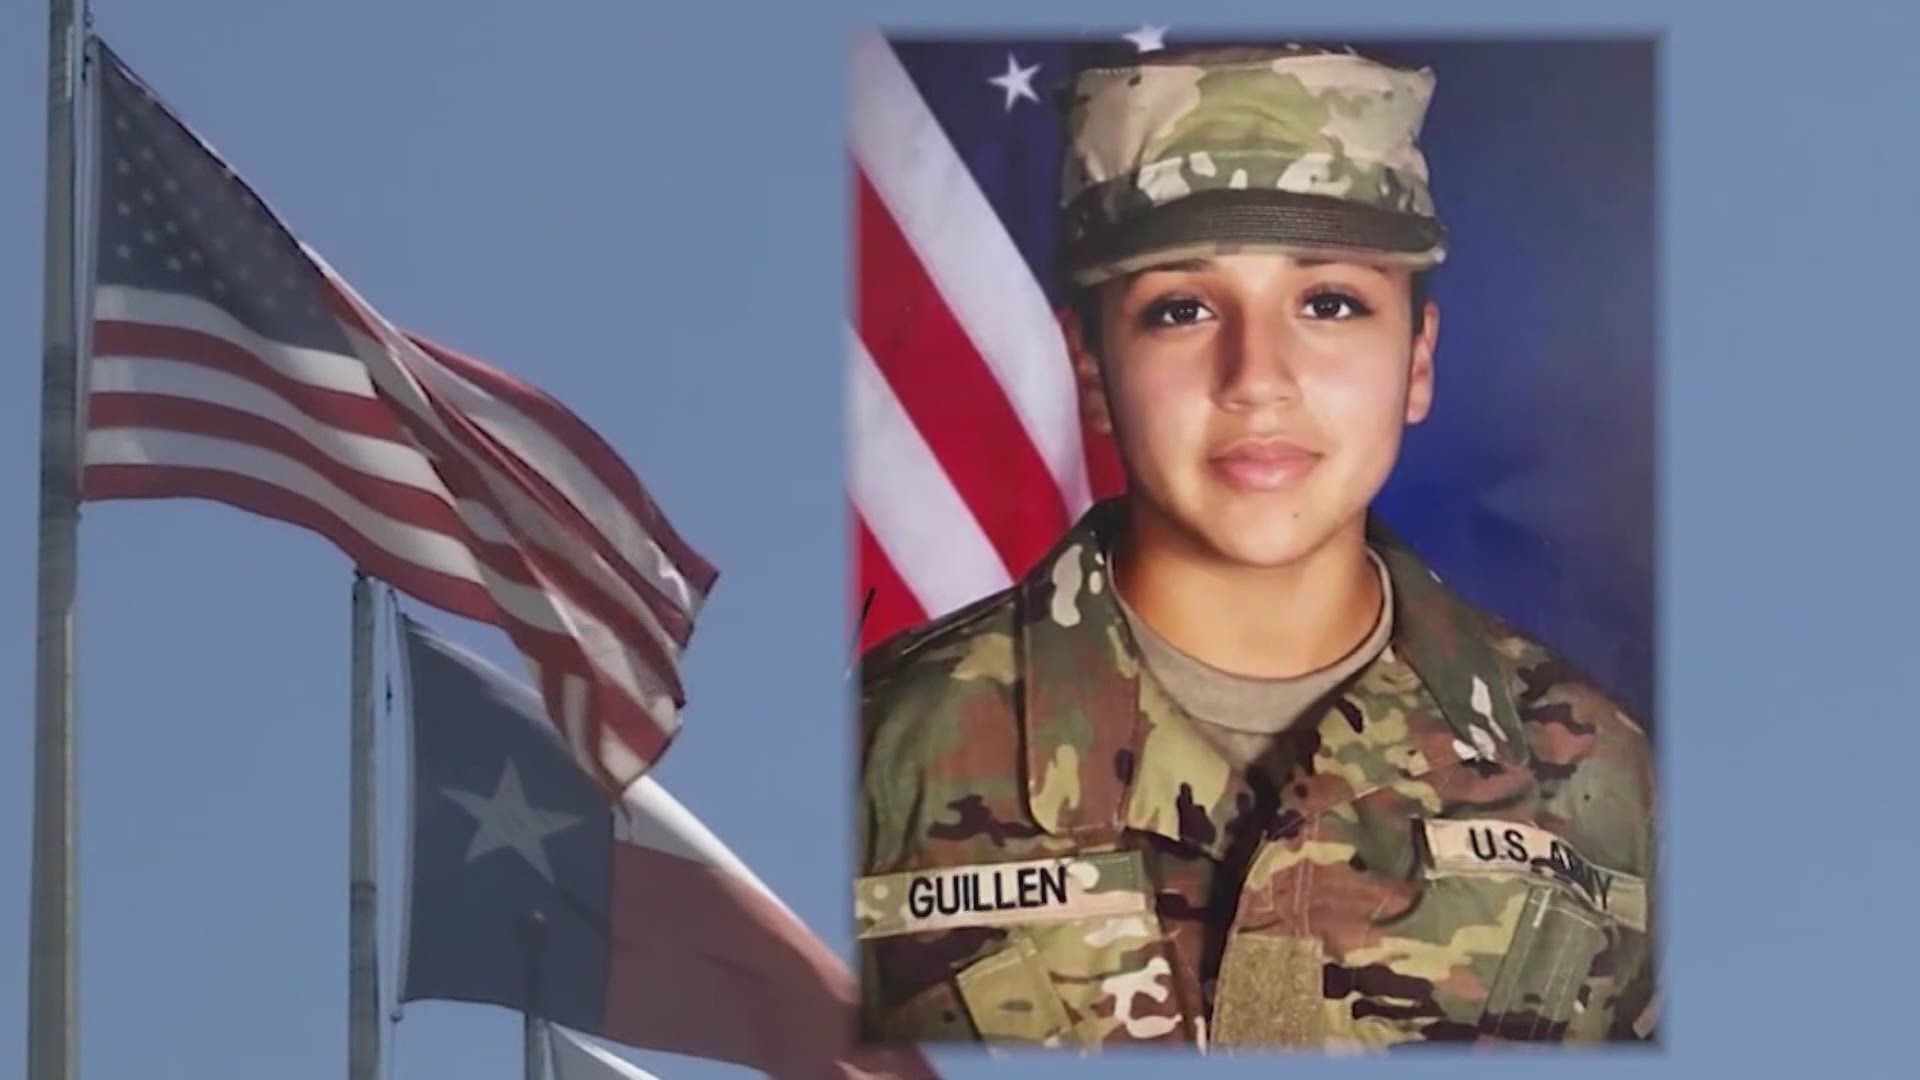 "Justice is needed for Vanessa and the soldiers facing an epidemic of sexual harassment and assault in our armed forces too often in the shadows."